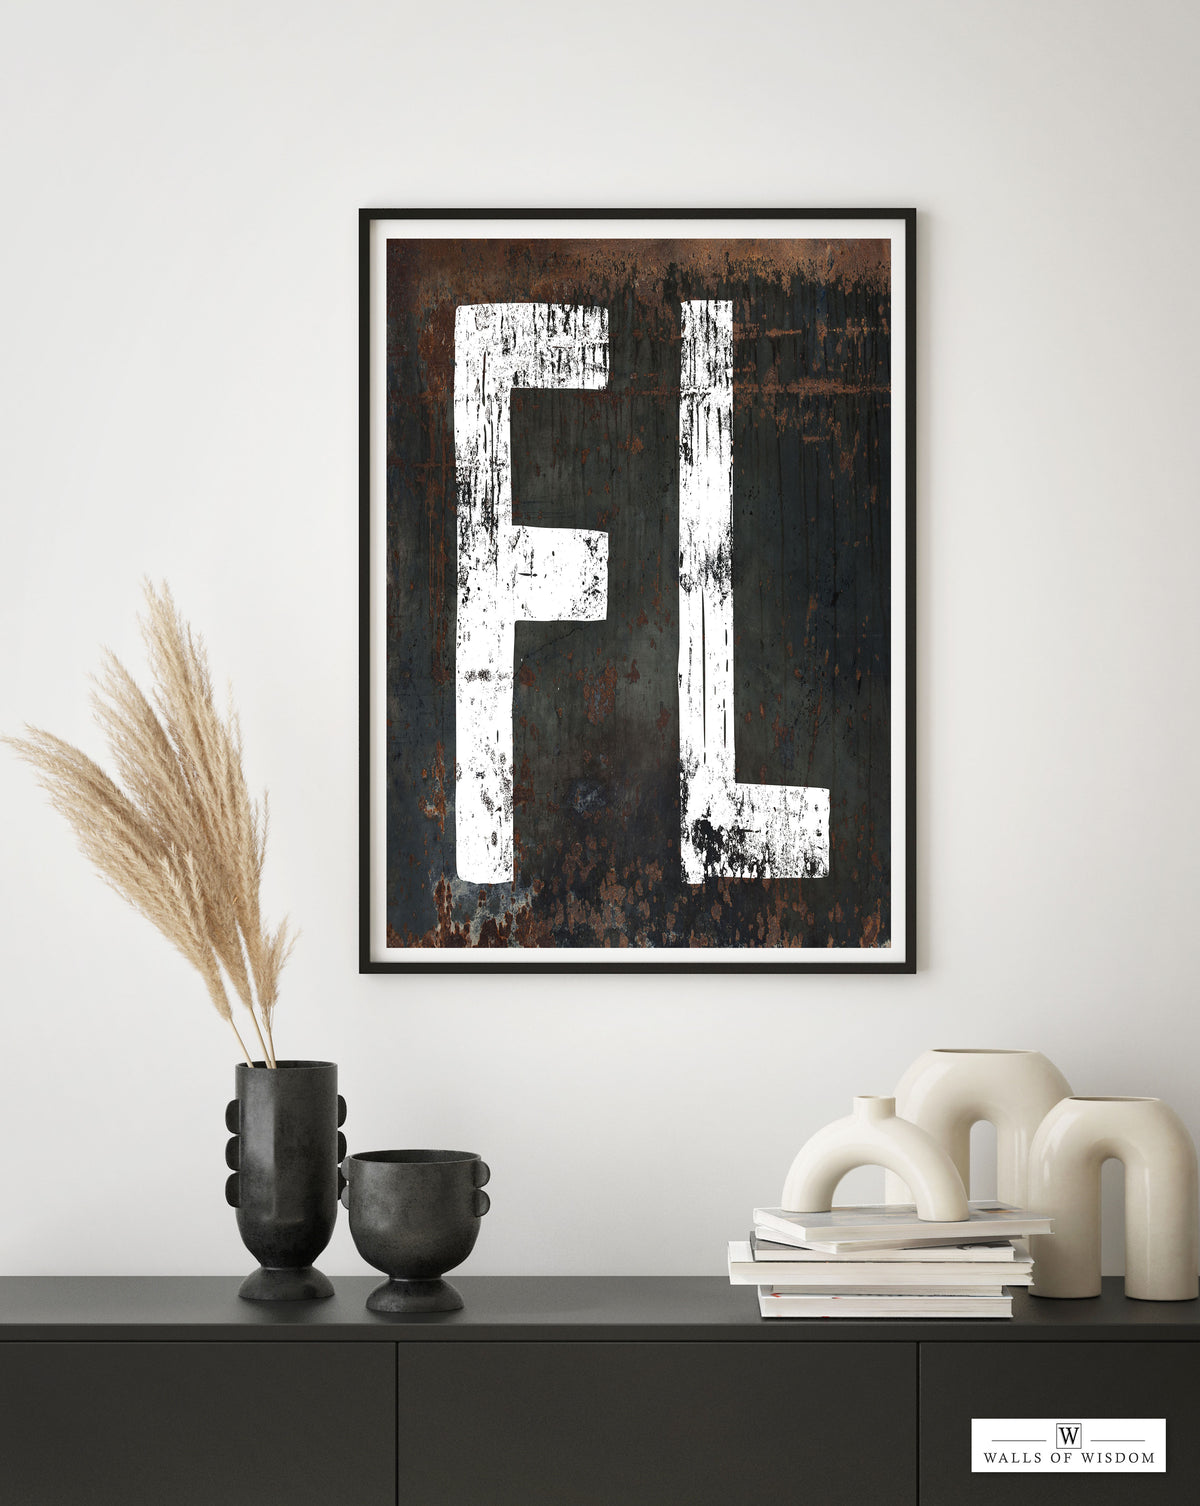 Vintage FL Home State Sign Poster - Florida Wall Art Home Bar Wall Art Vintage Sign